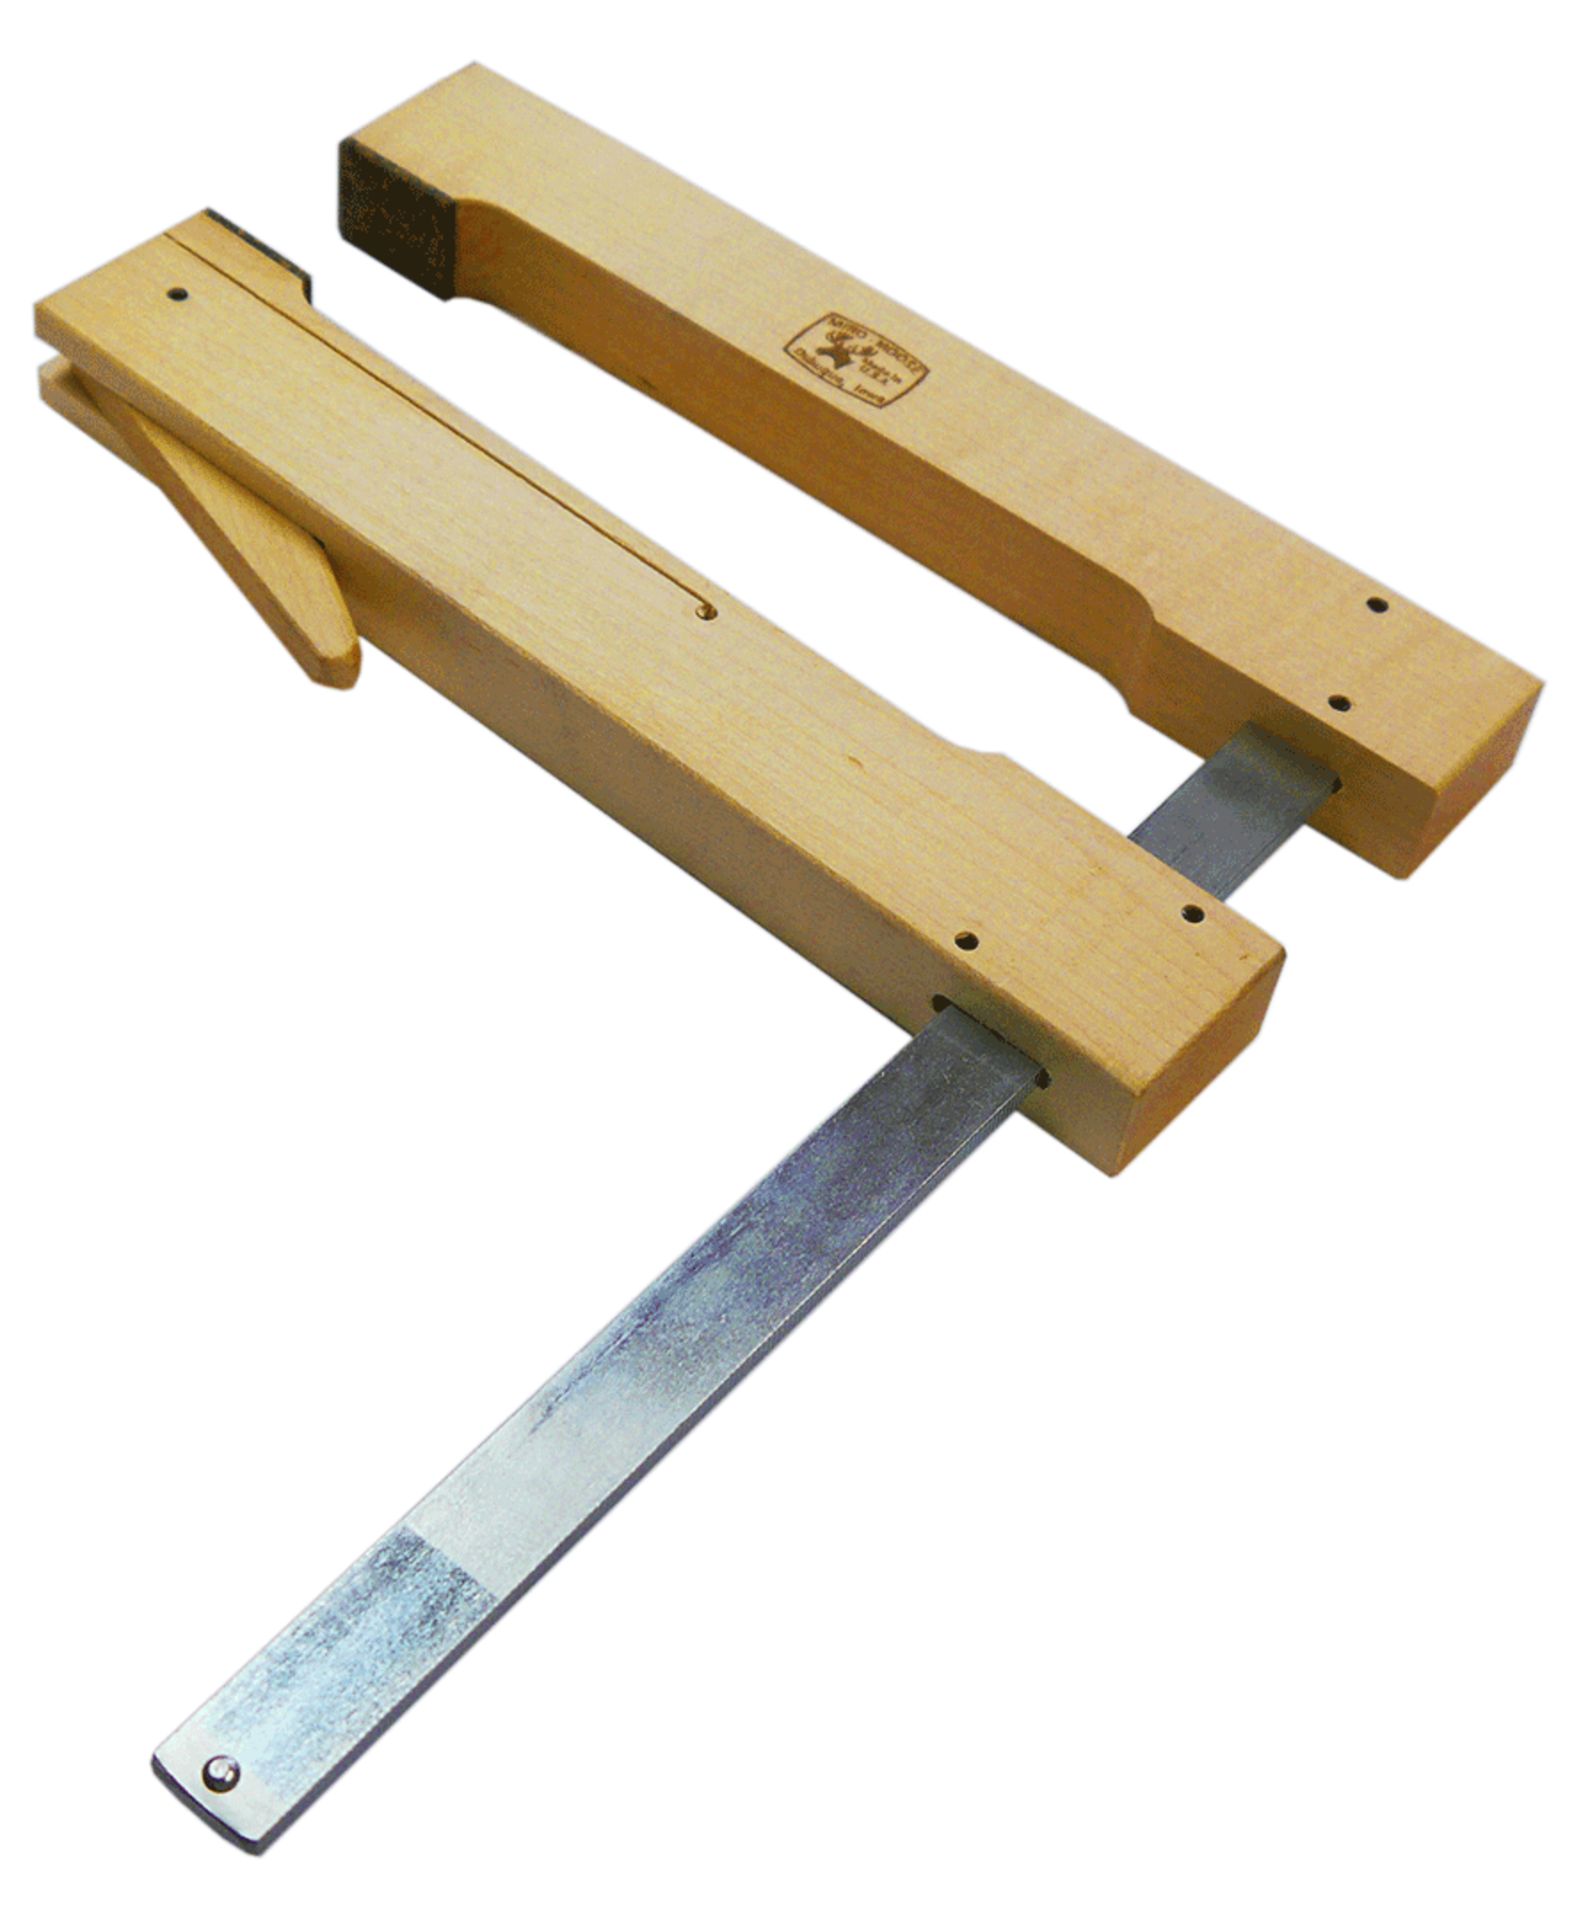 + VAT Grade A Two Wood & Aluminium F Clamps (Image IS Similar To Item) ISP £31.96 (Axminster Trade